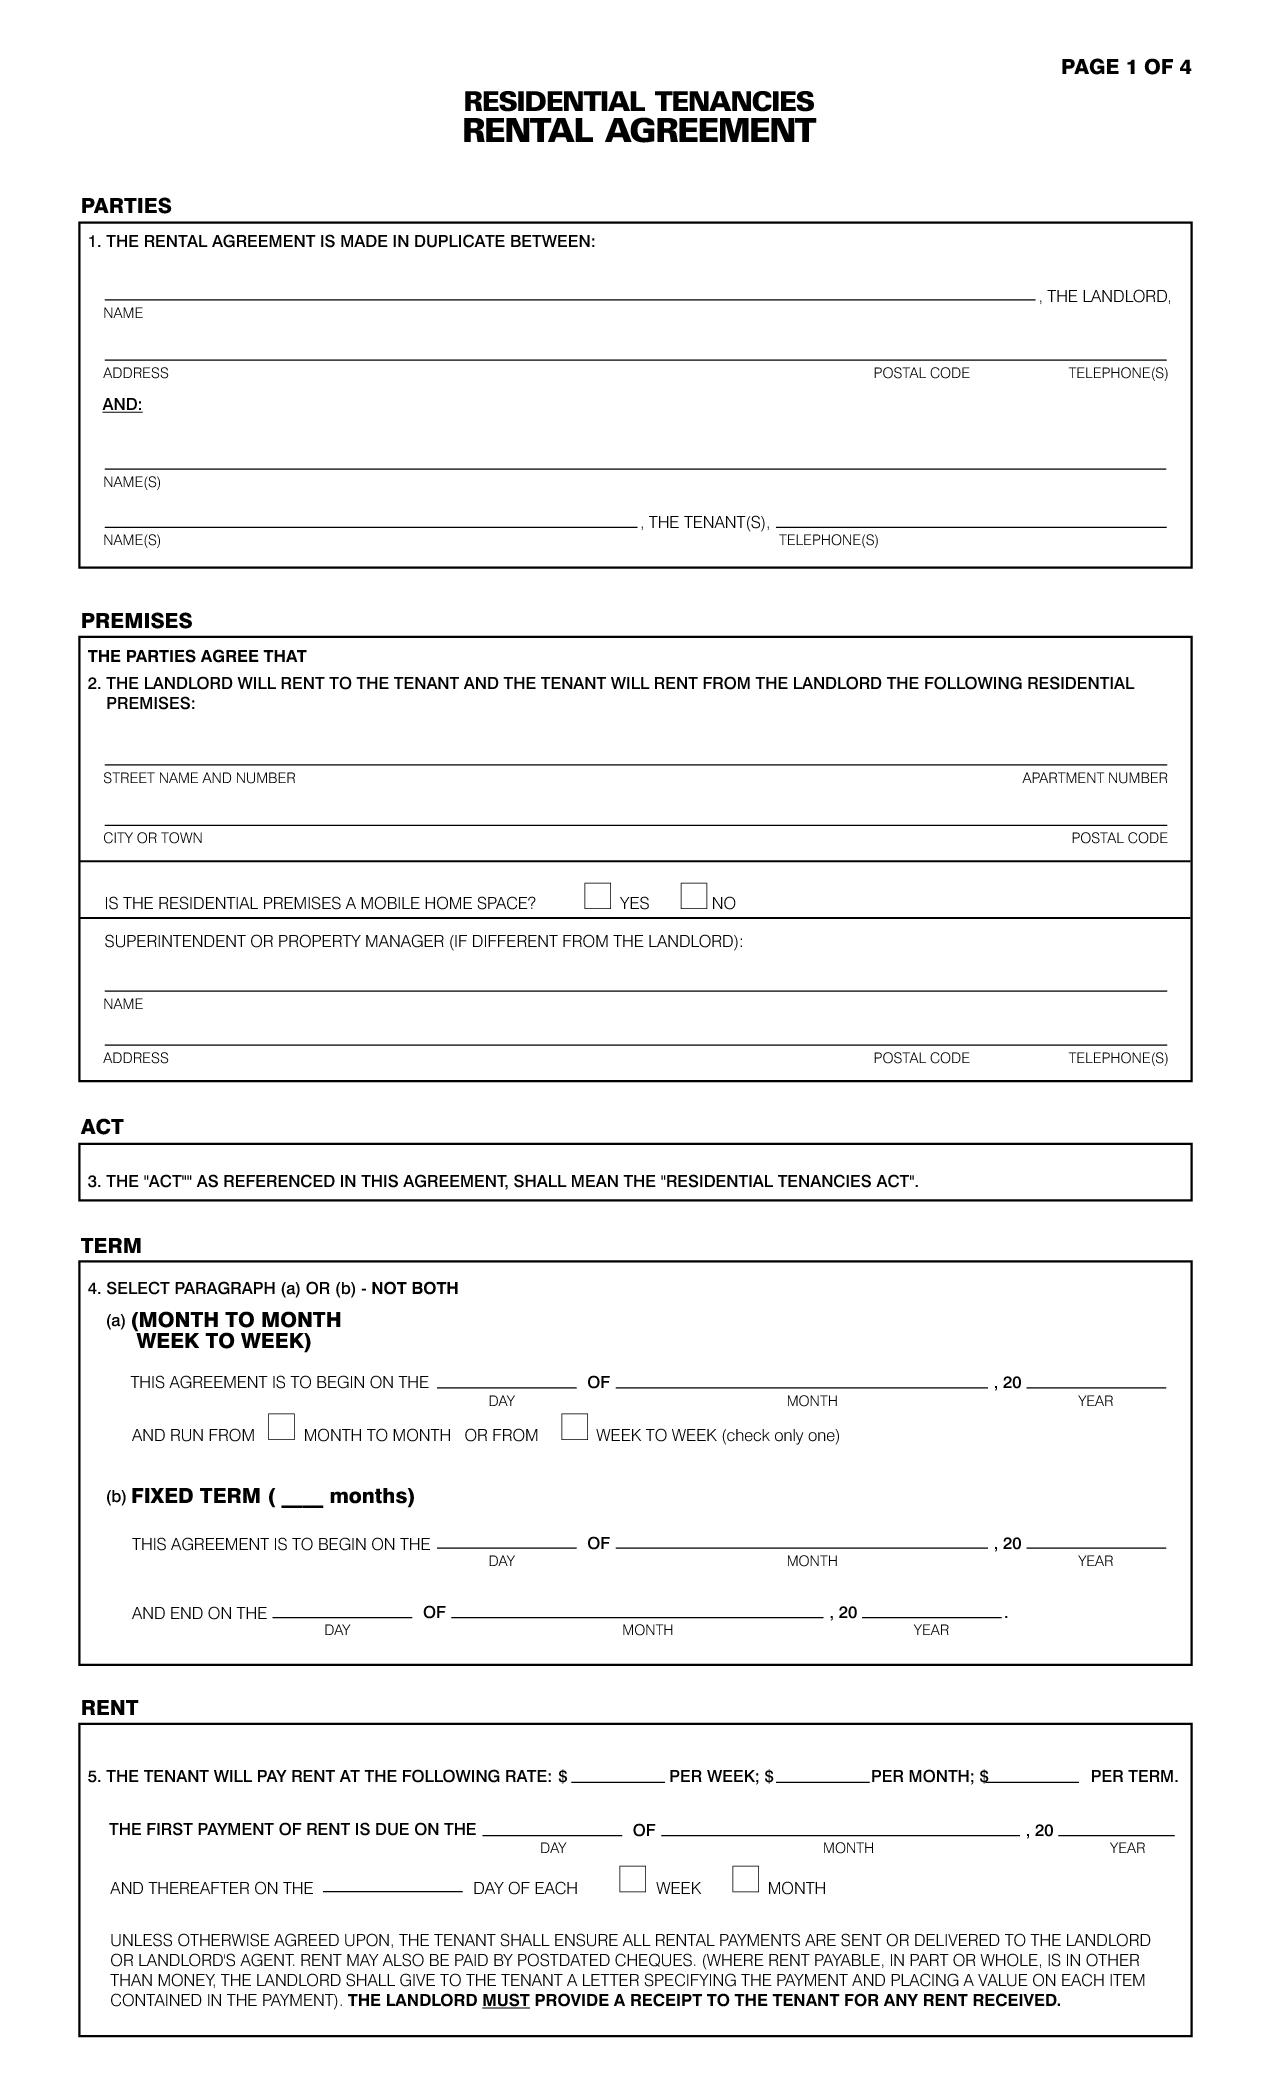 Rental Agreement Template Free Residential Lease Agreement Template Free Download Blank Rental